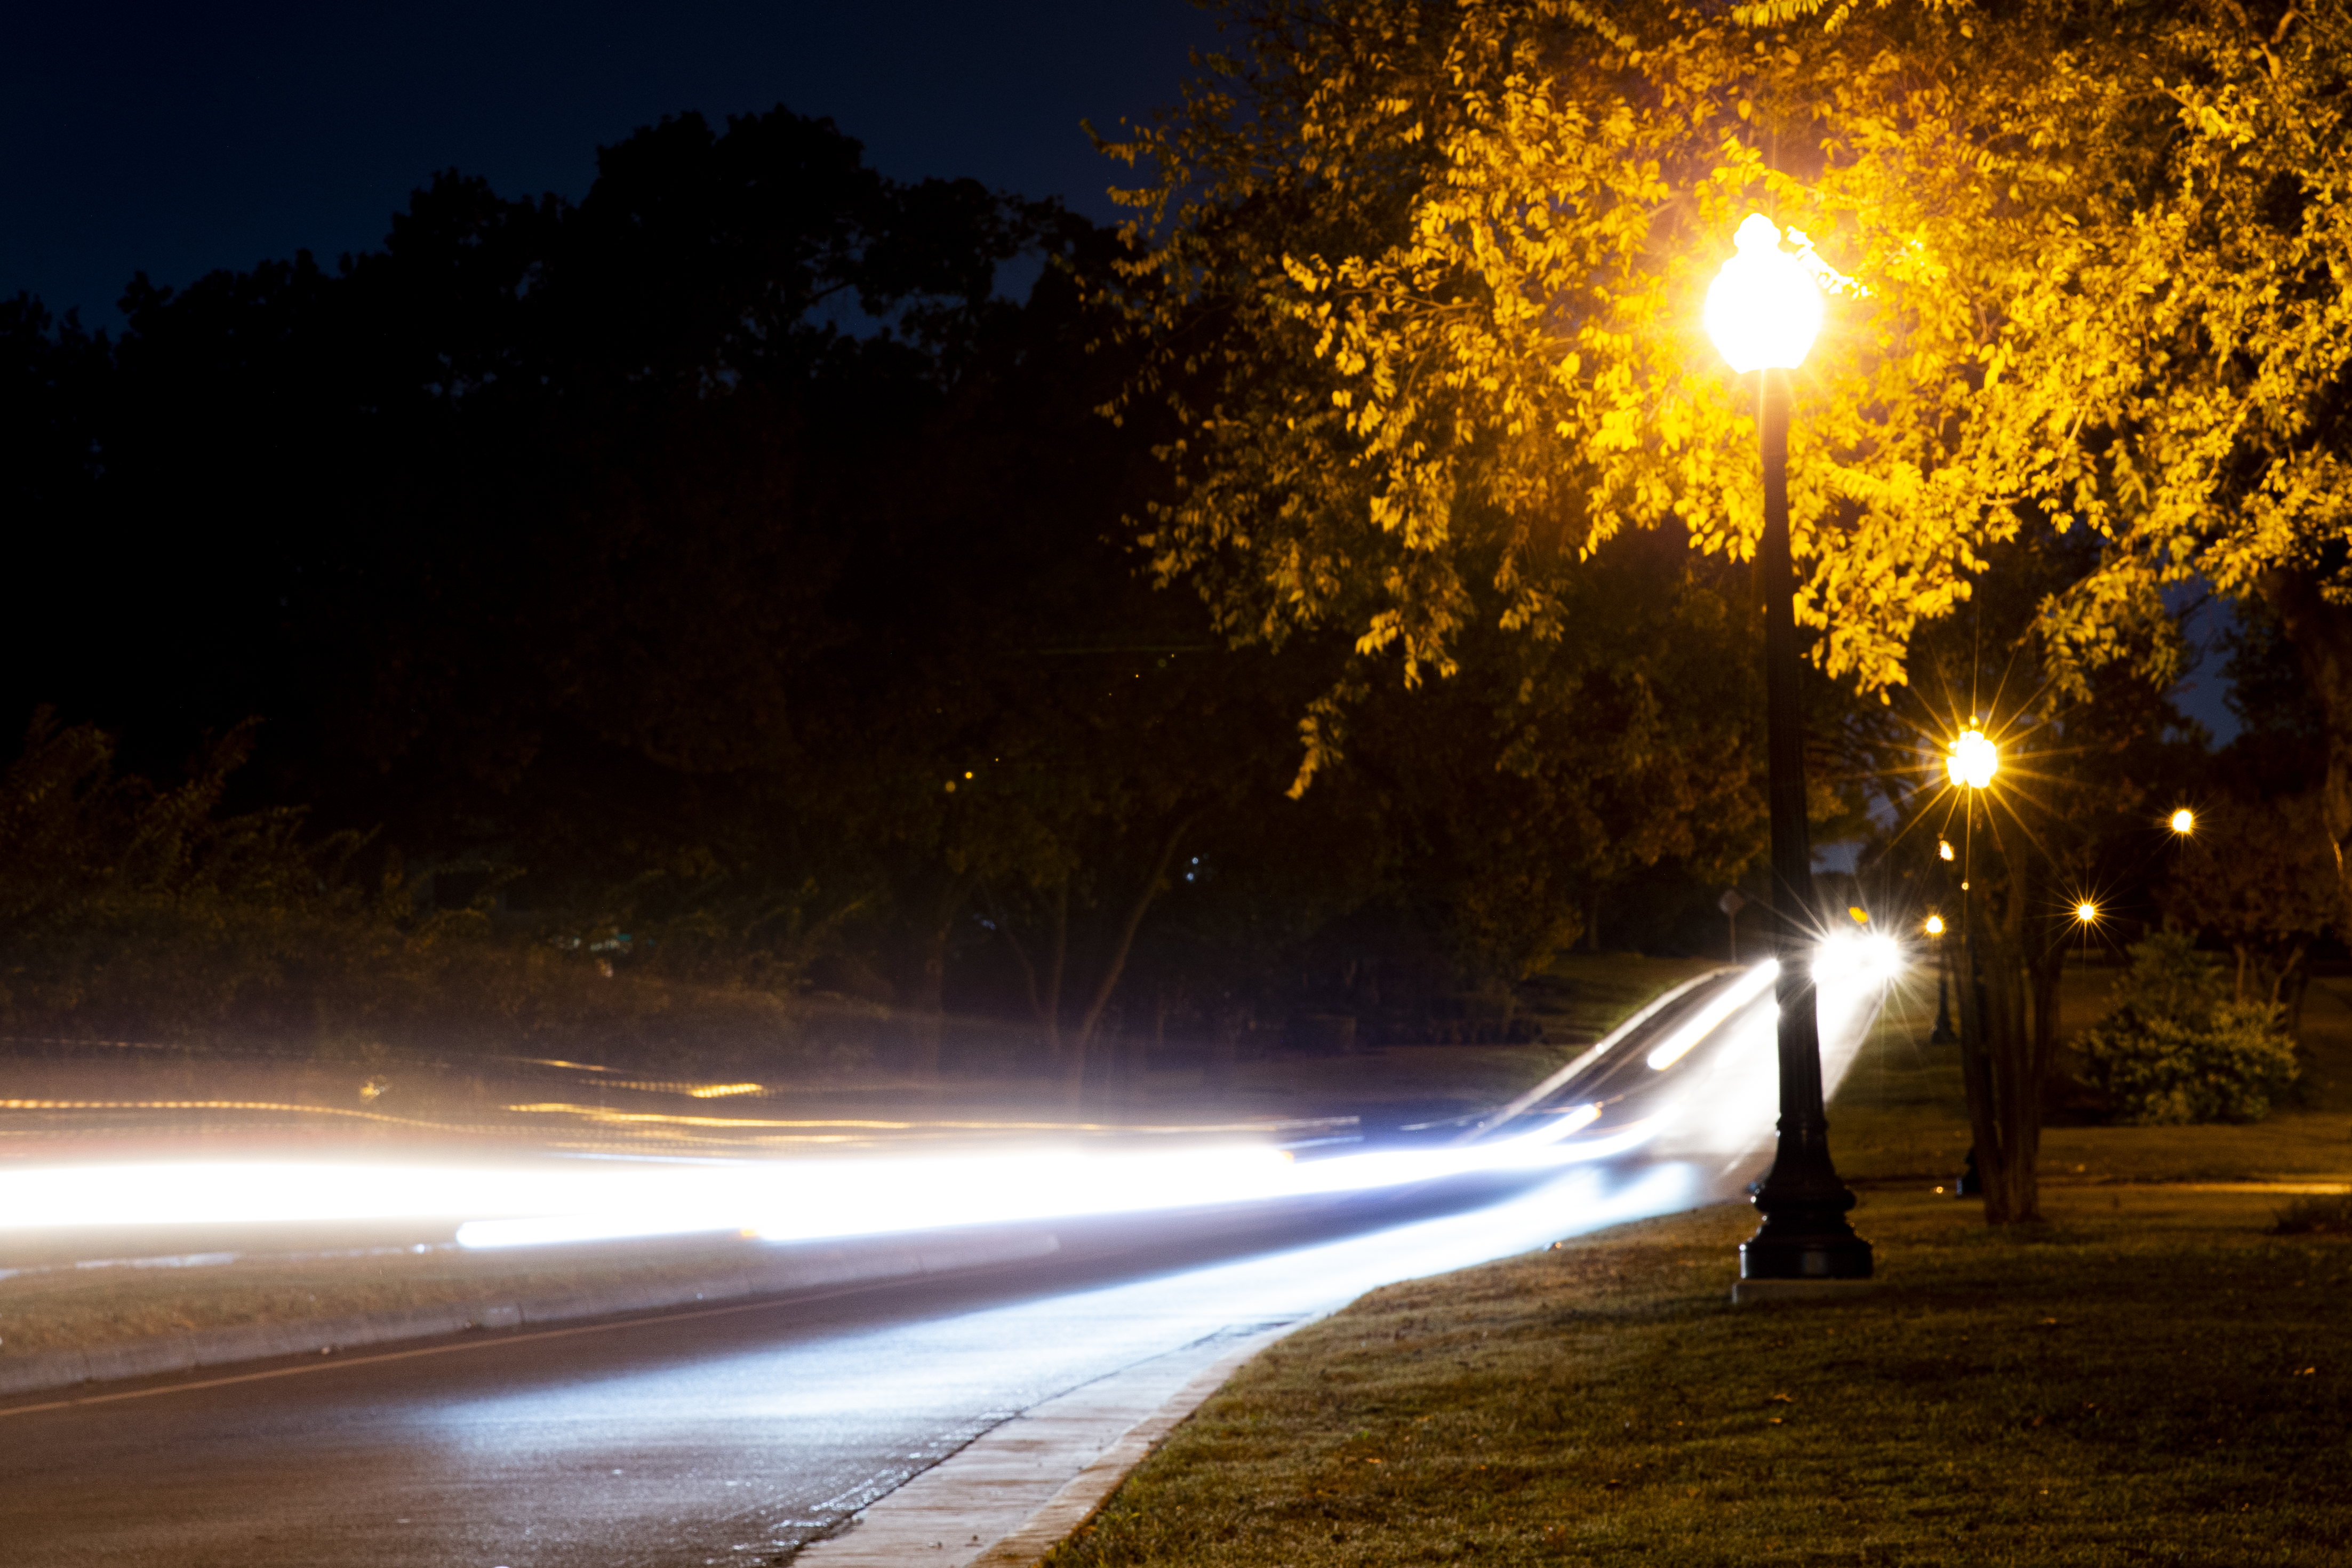 Dallas upgrading 1,000 street lights to LED, expanding Wi-Fi to needed areas